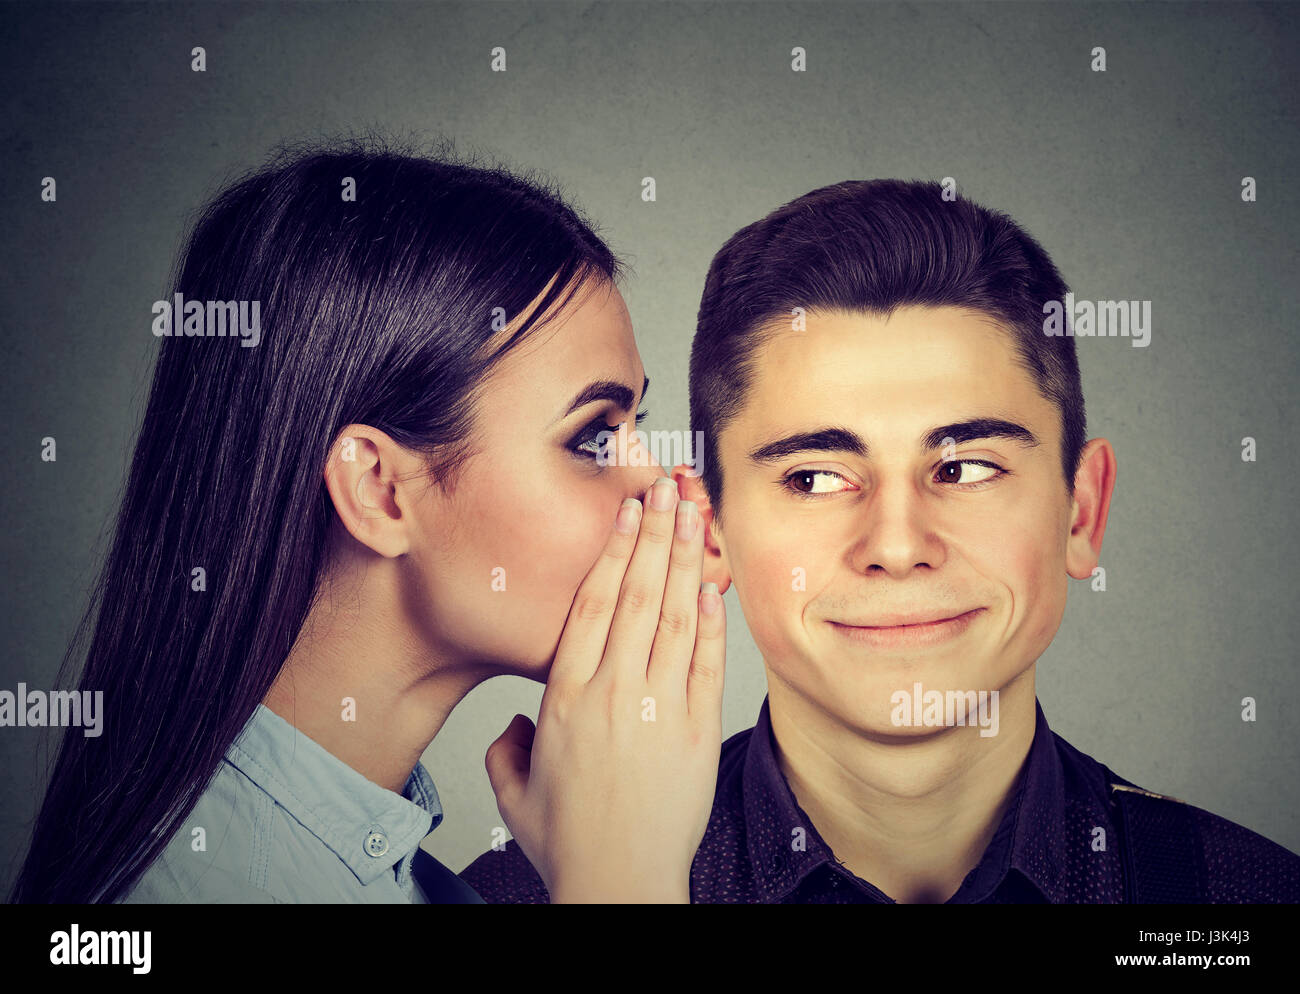 Latest rumors. Curious man listening gossip in the ear Stock Photo